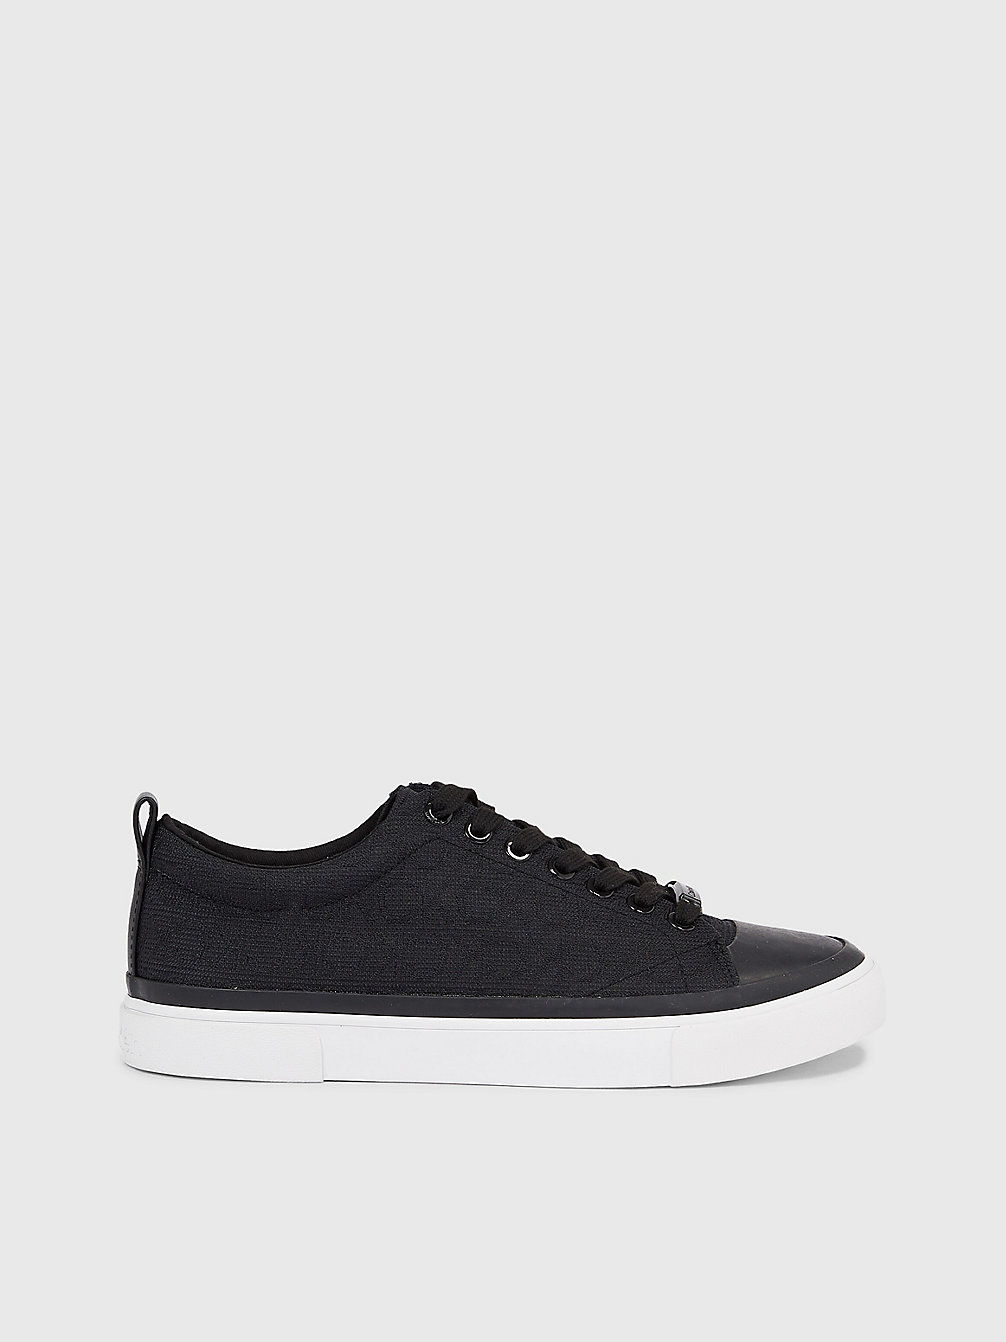 BLACK MONO Recycled Logo Trainers undefined women Calvin Klein